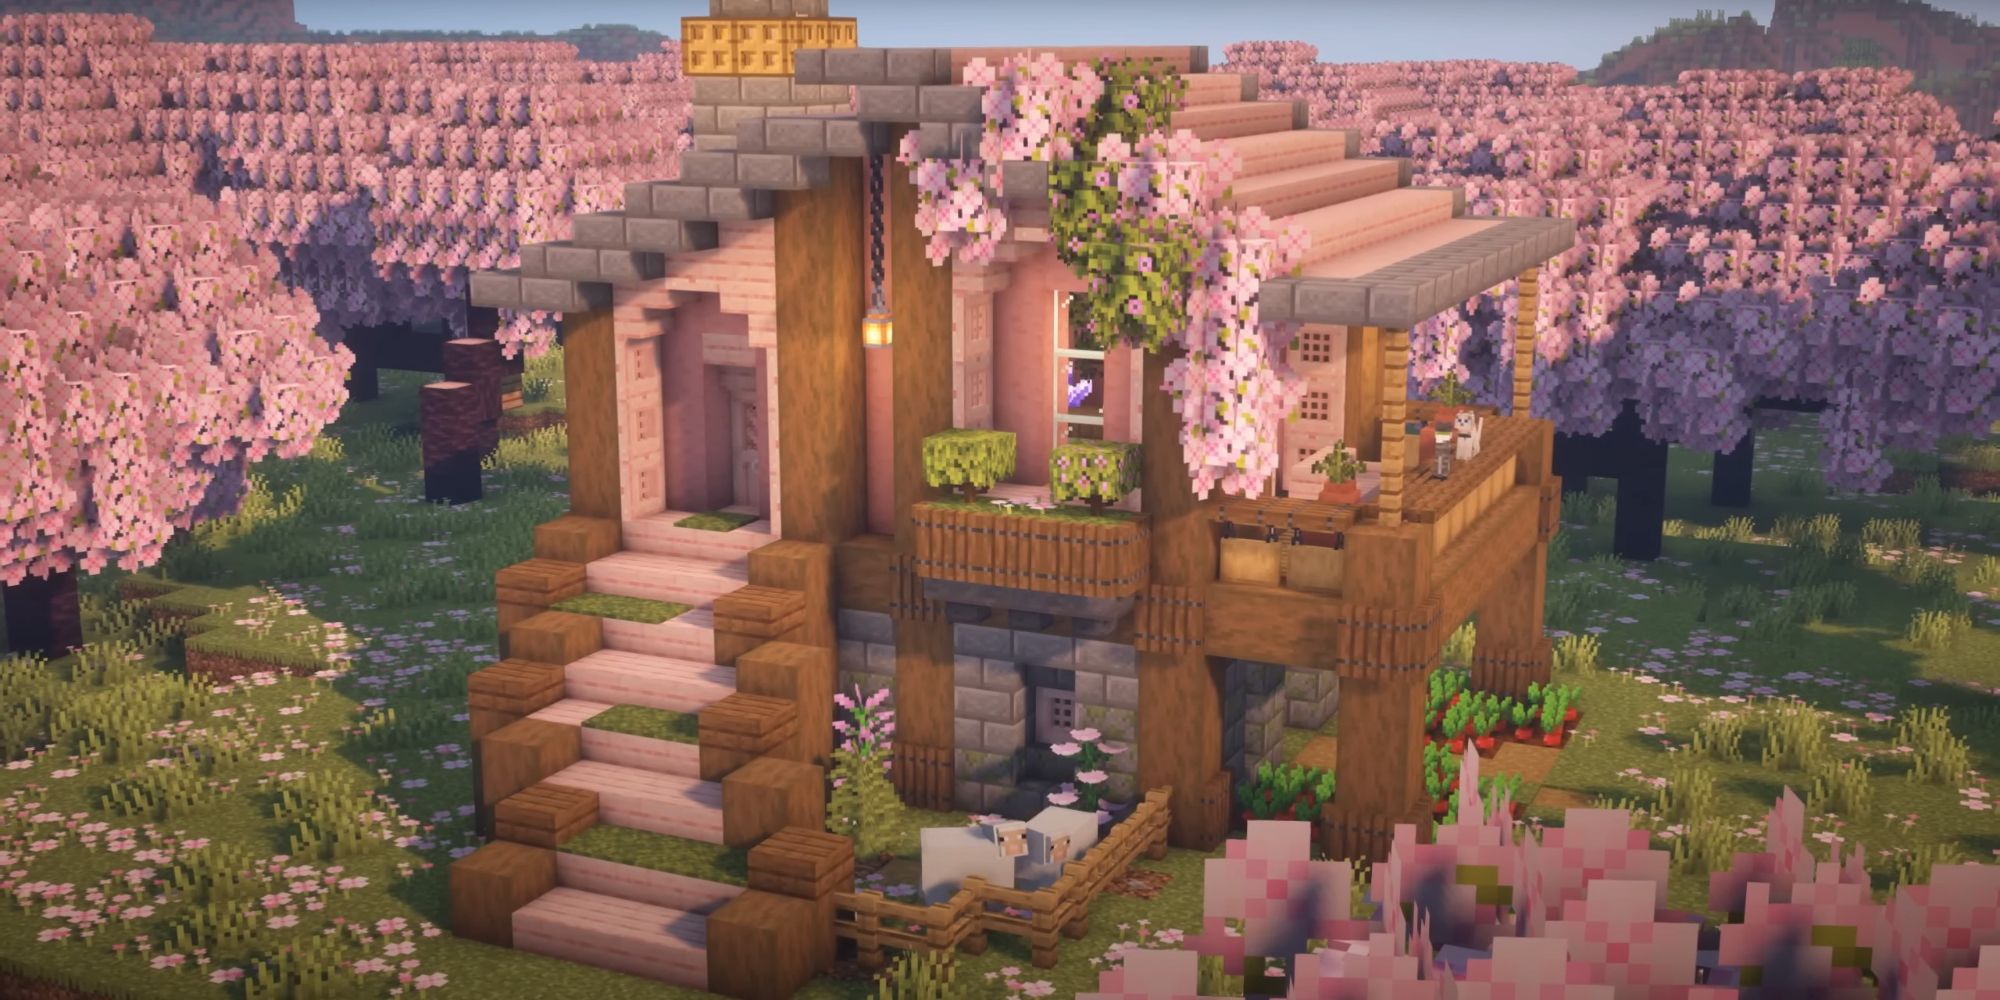 An image from Minecraft of a Cherry Blossom Survival House. This is built within a cherry blossom biome, and is made out of spruce logs and pink cherry blossom planks.